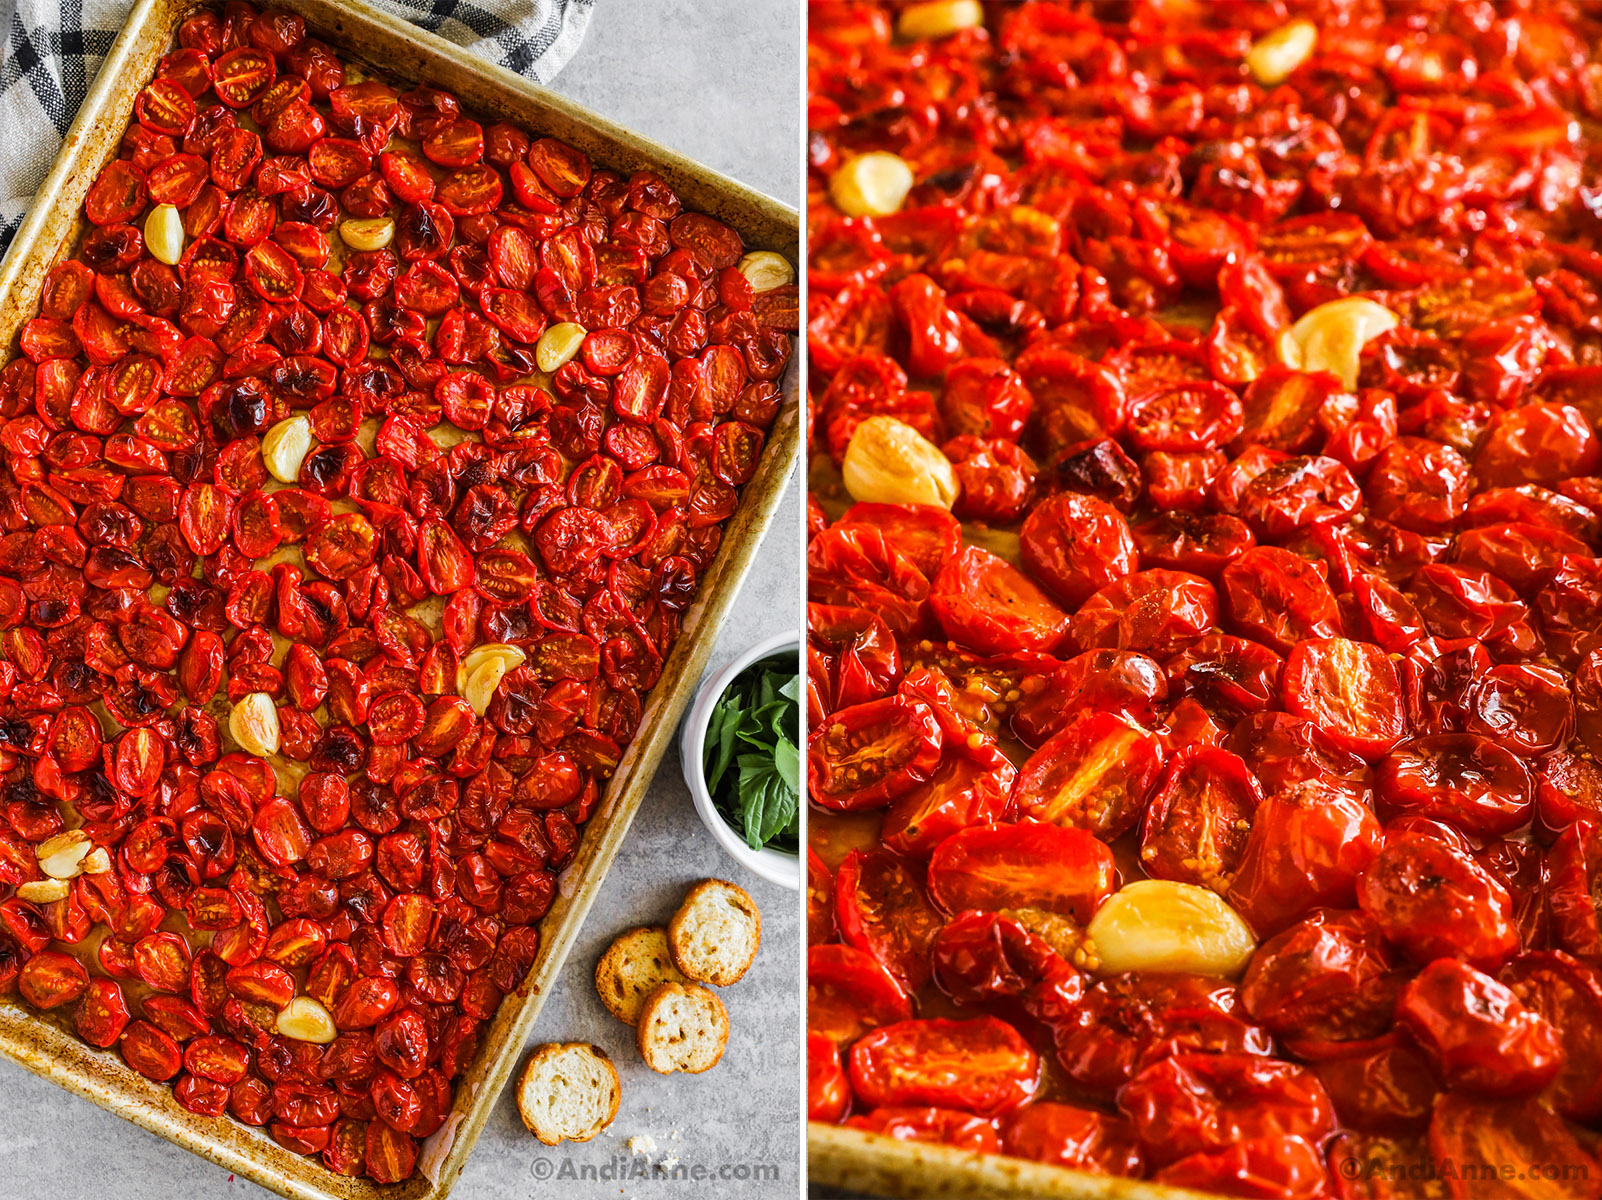 Two images of sliced tomatoes and garlic cloves on a baking sheet.